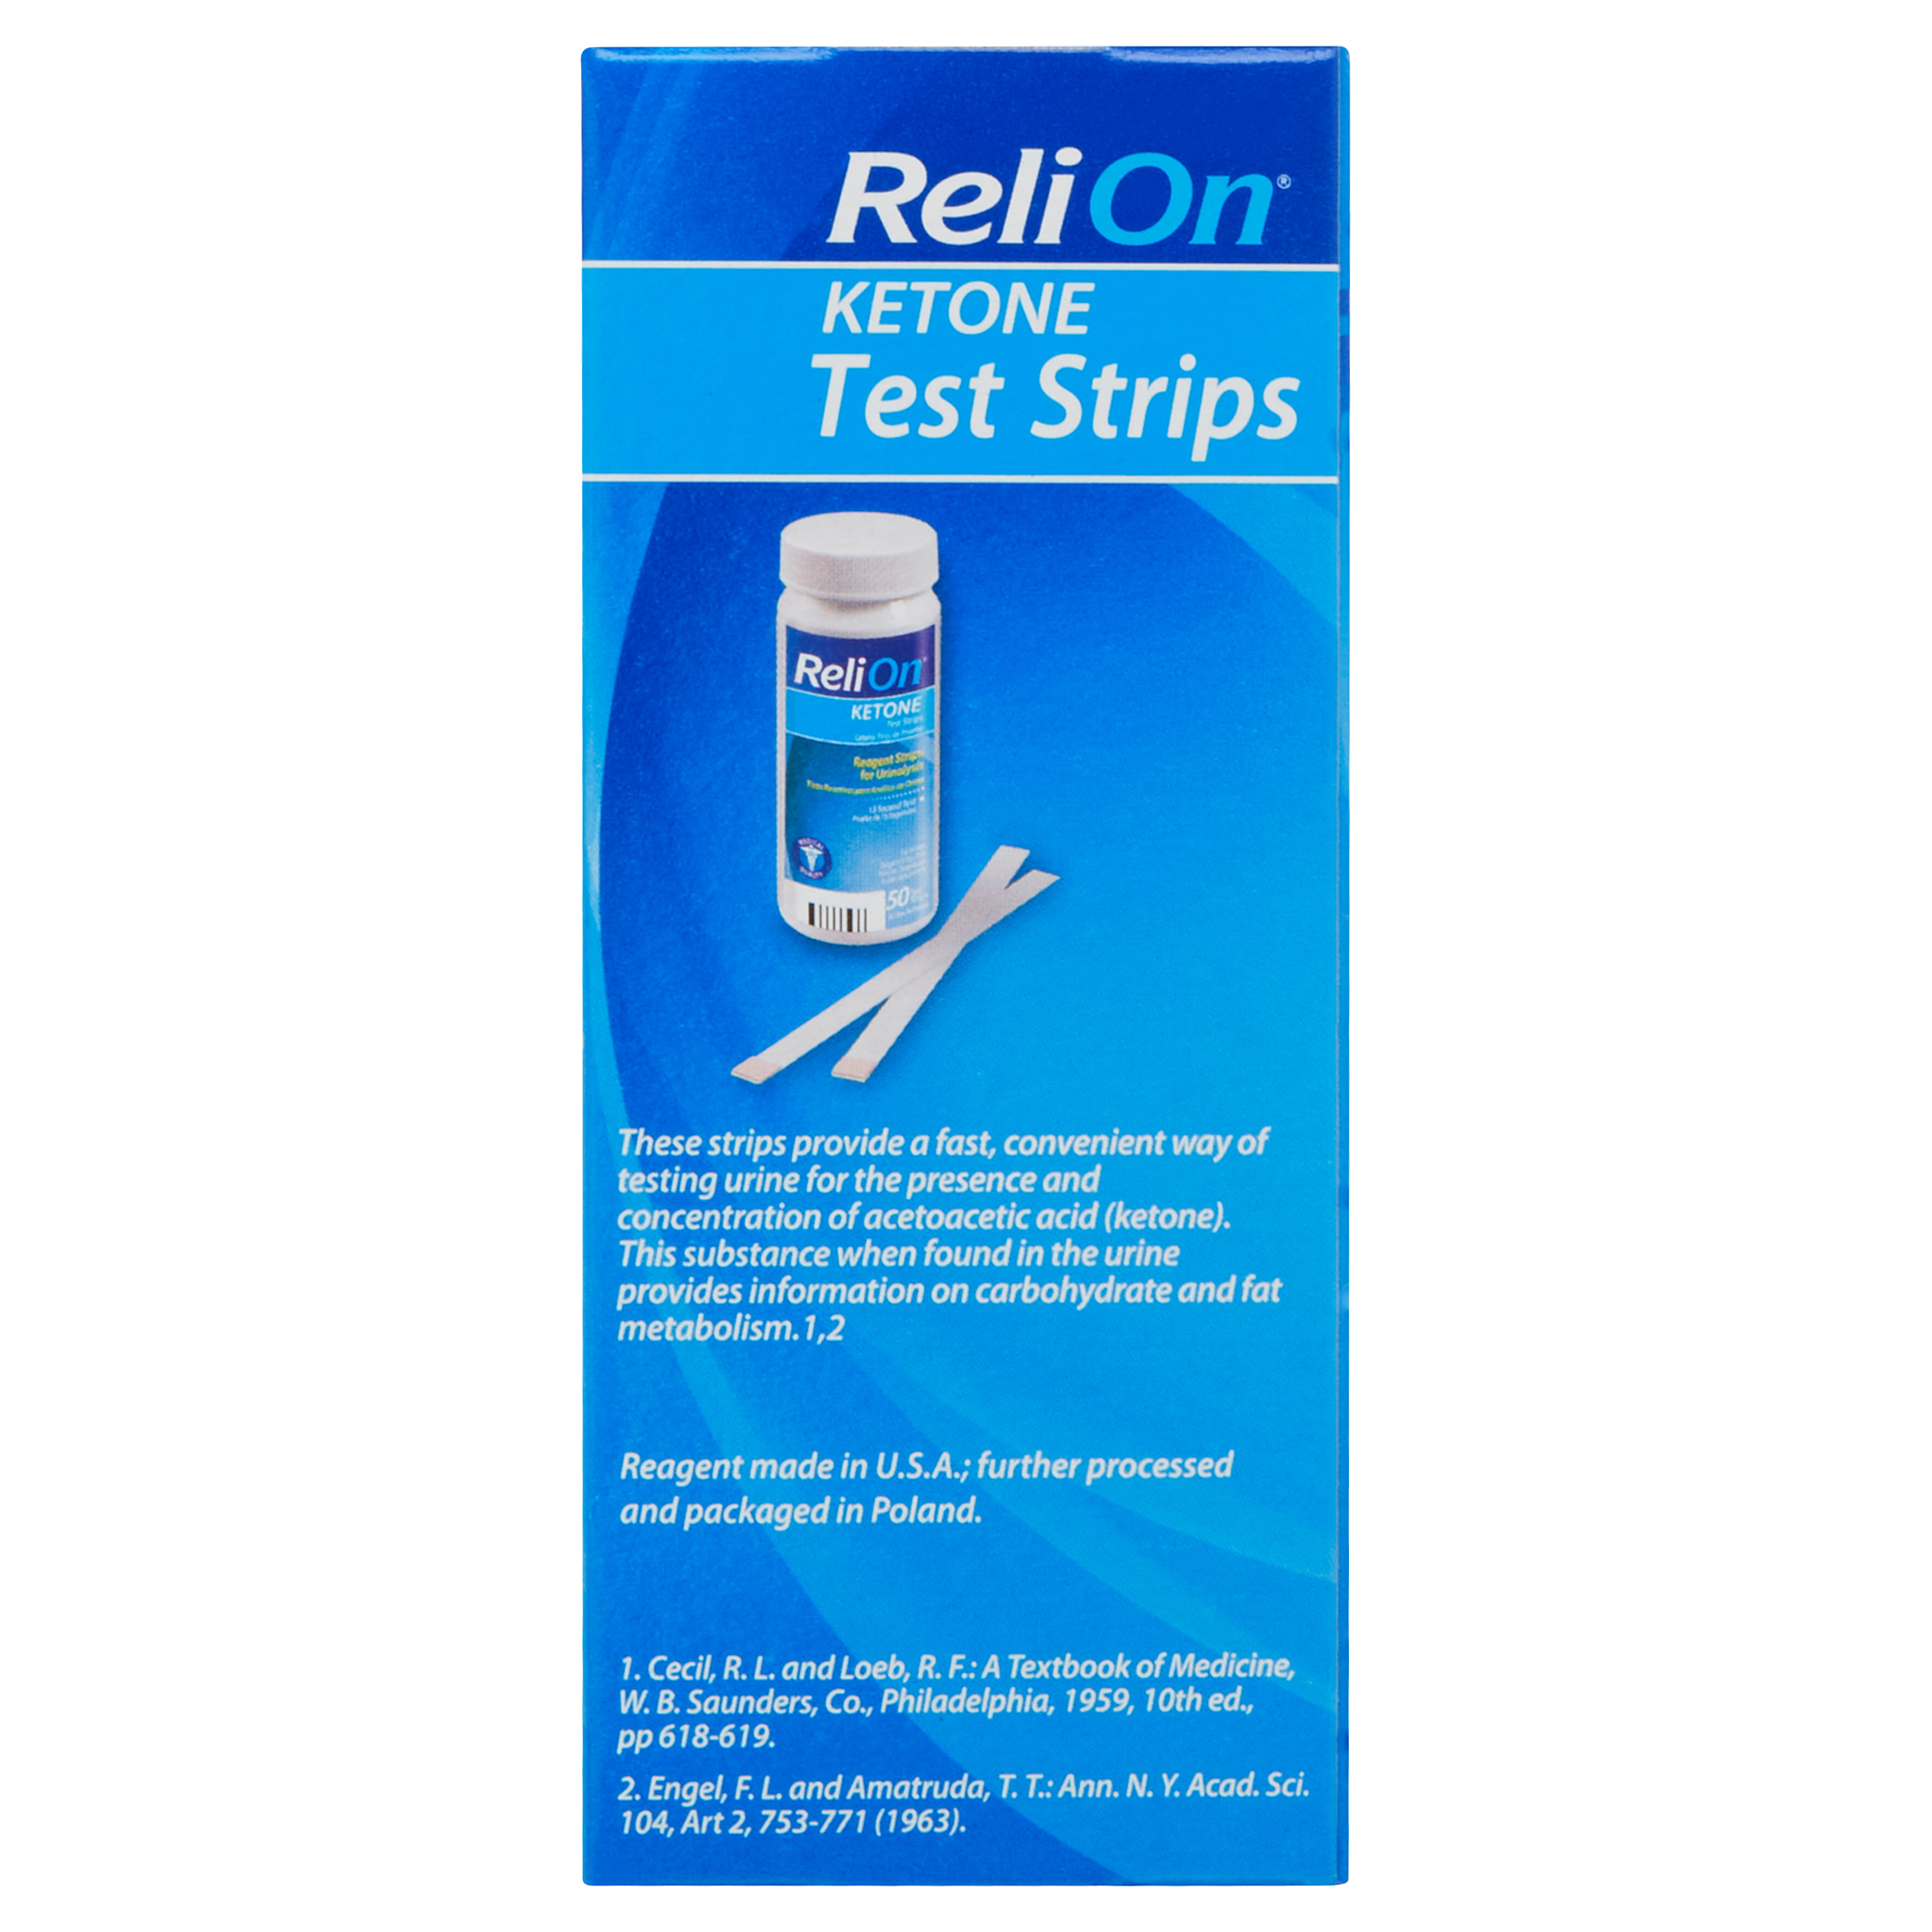 ReliOn Ketone Test Strips, 50 Count - image 5 of 7